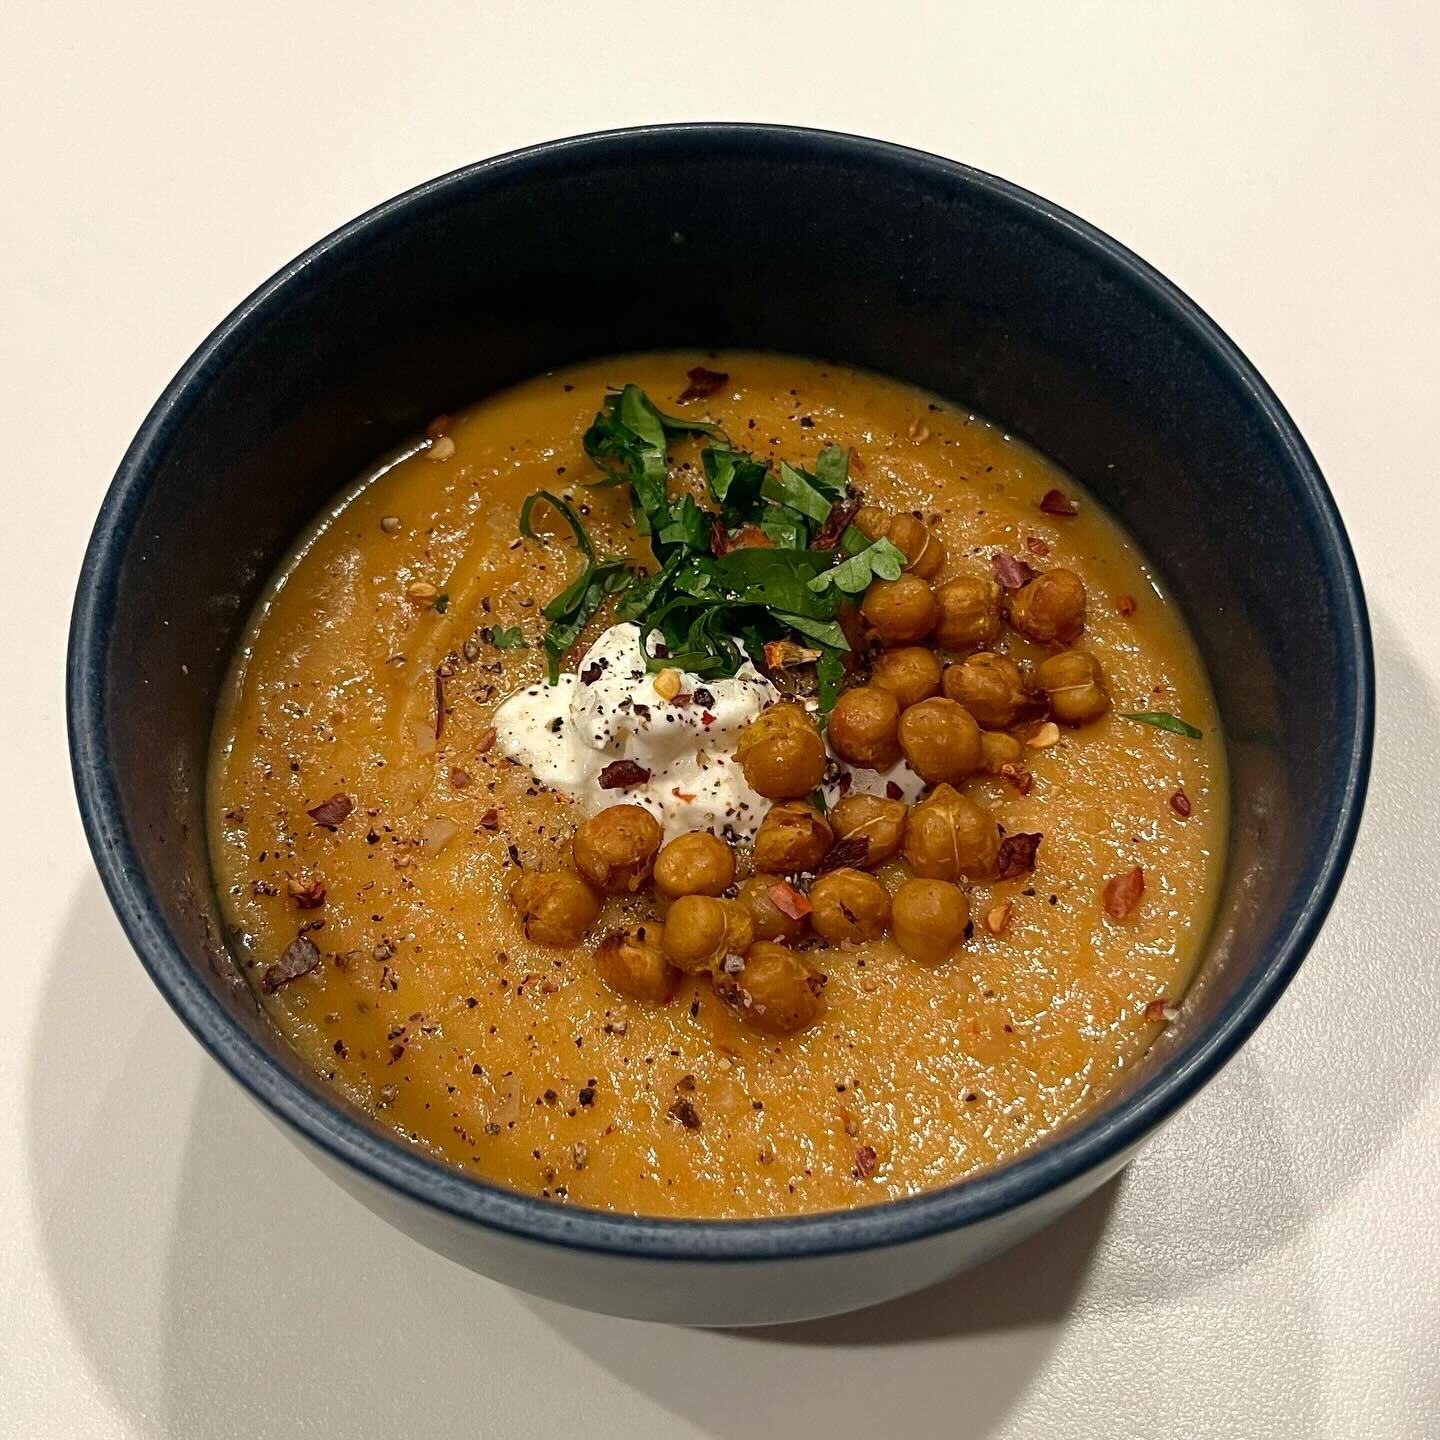 Rainstorm in LA calls for soup night! Threw this together with whatever we had in the kitchen: sweet potato, carrot, Yukon gold potatoes + coconut milk + shallots and onion and spices and all that jazz. Topped with sour cream, crispy chickpeas and ci